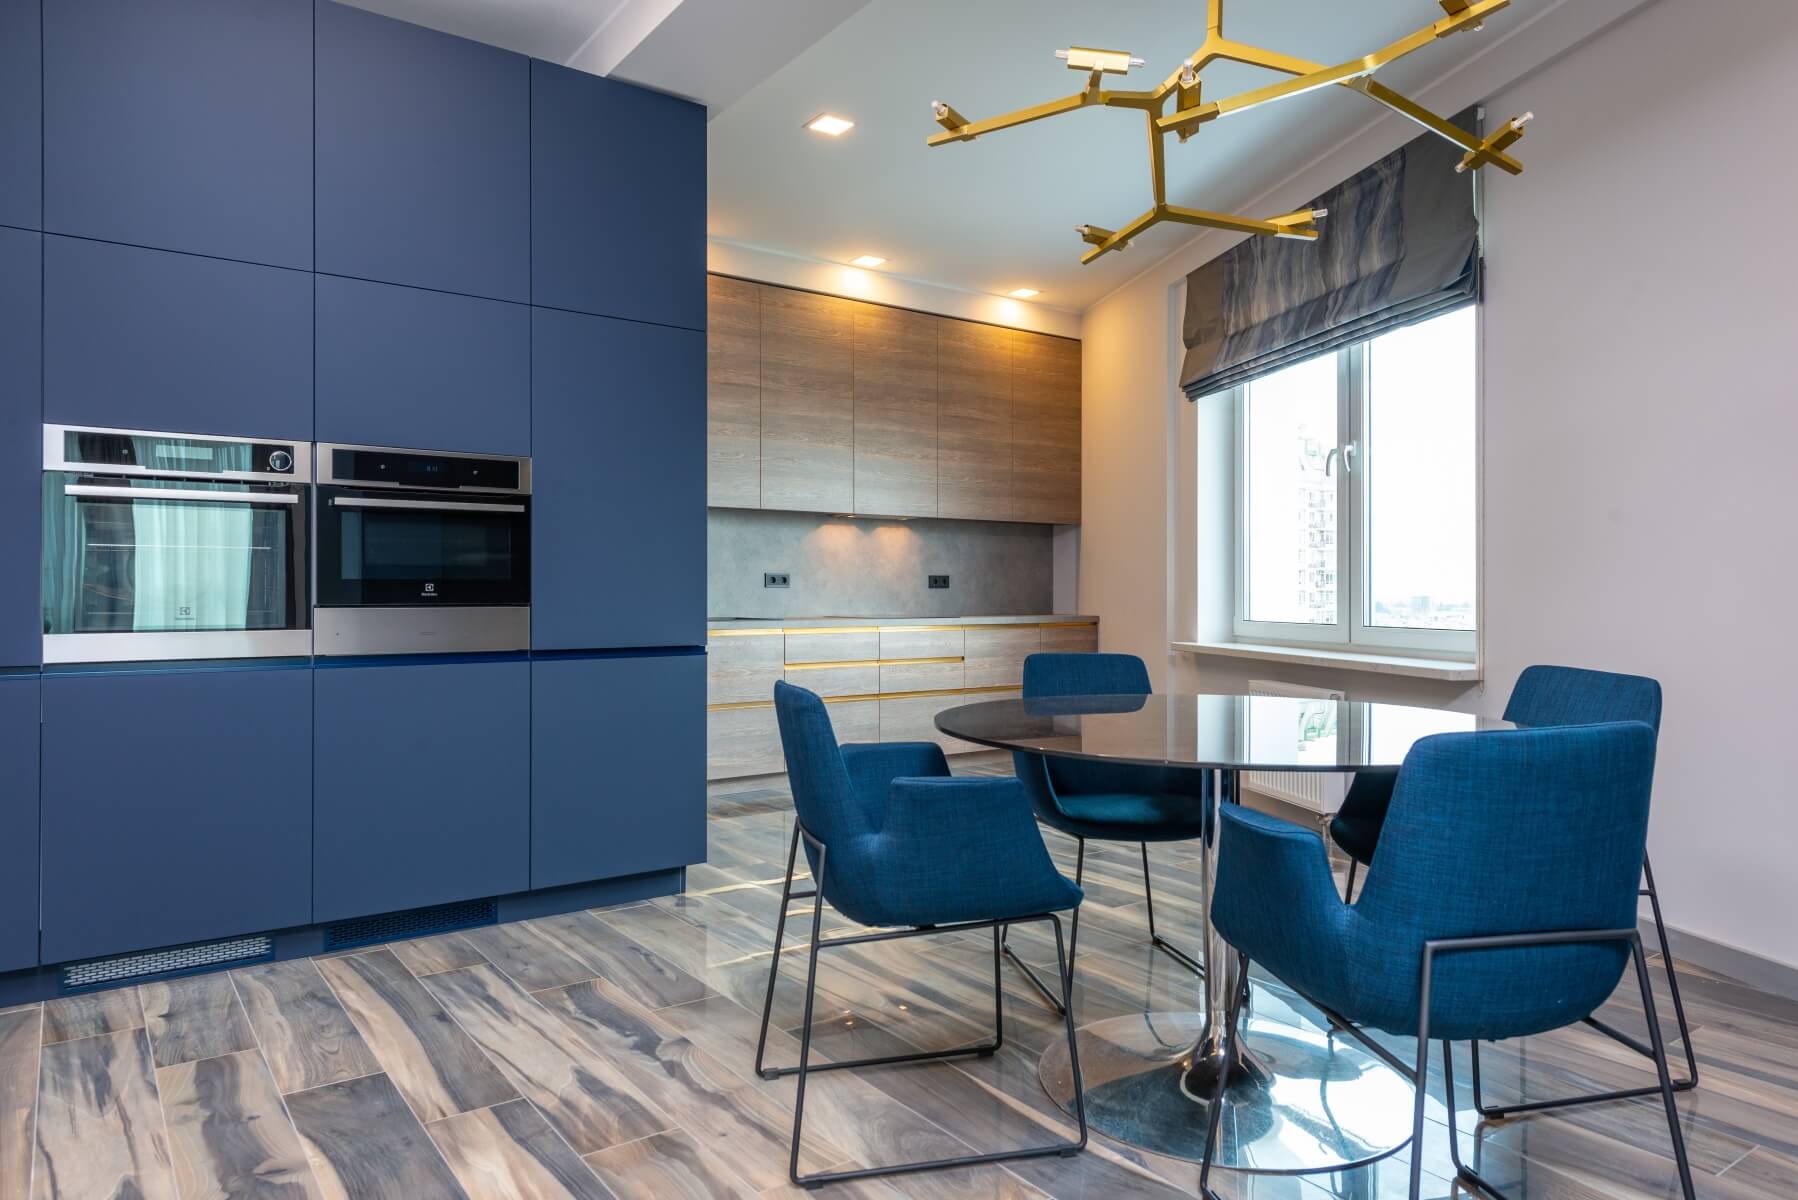 Bespoke Furniture Kitchen in Blue by Kingston Cabinetry